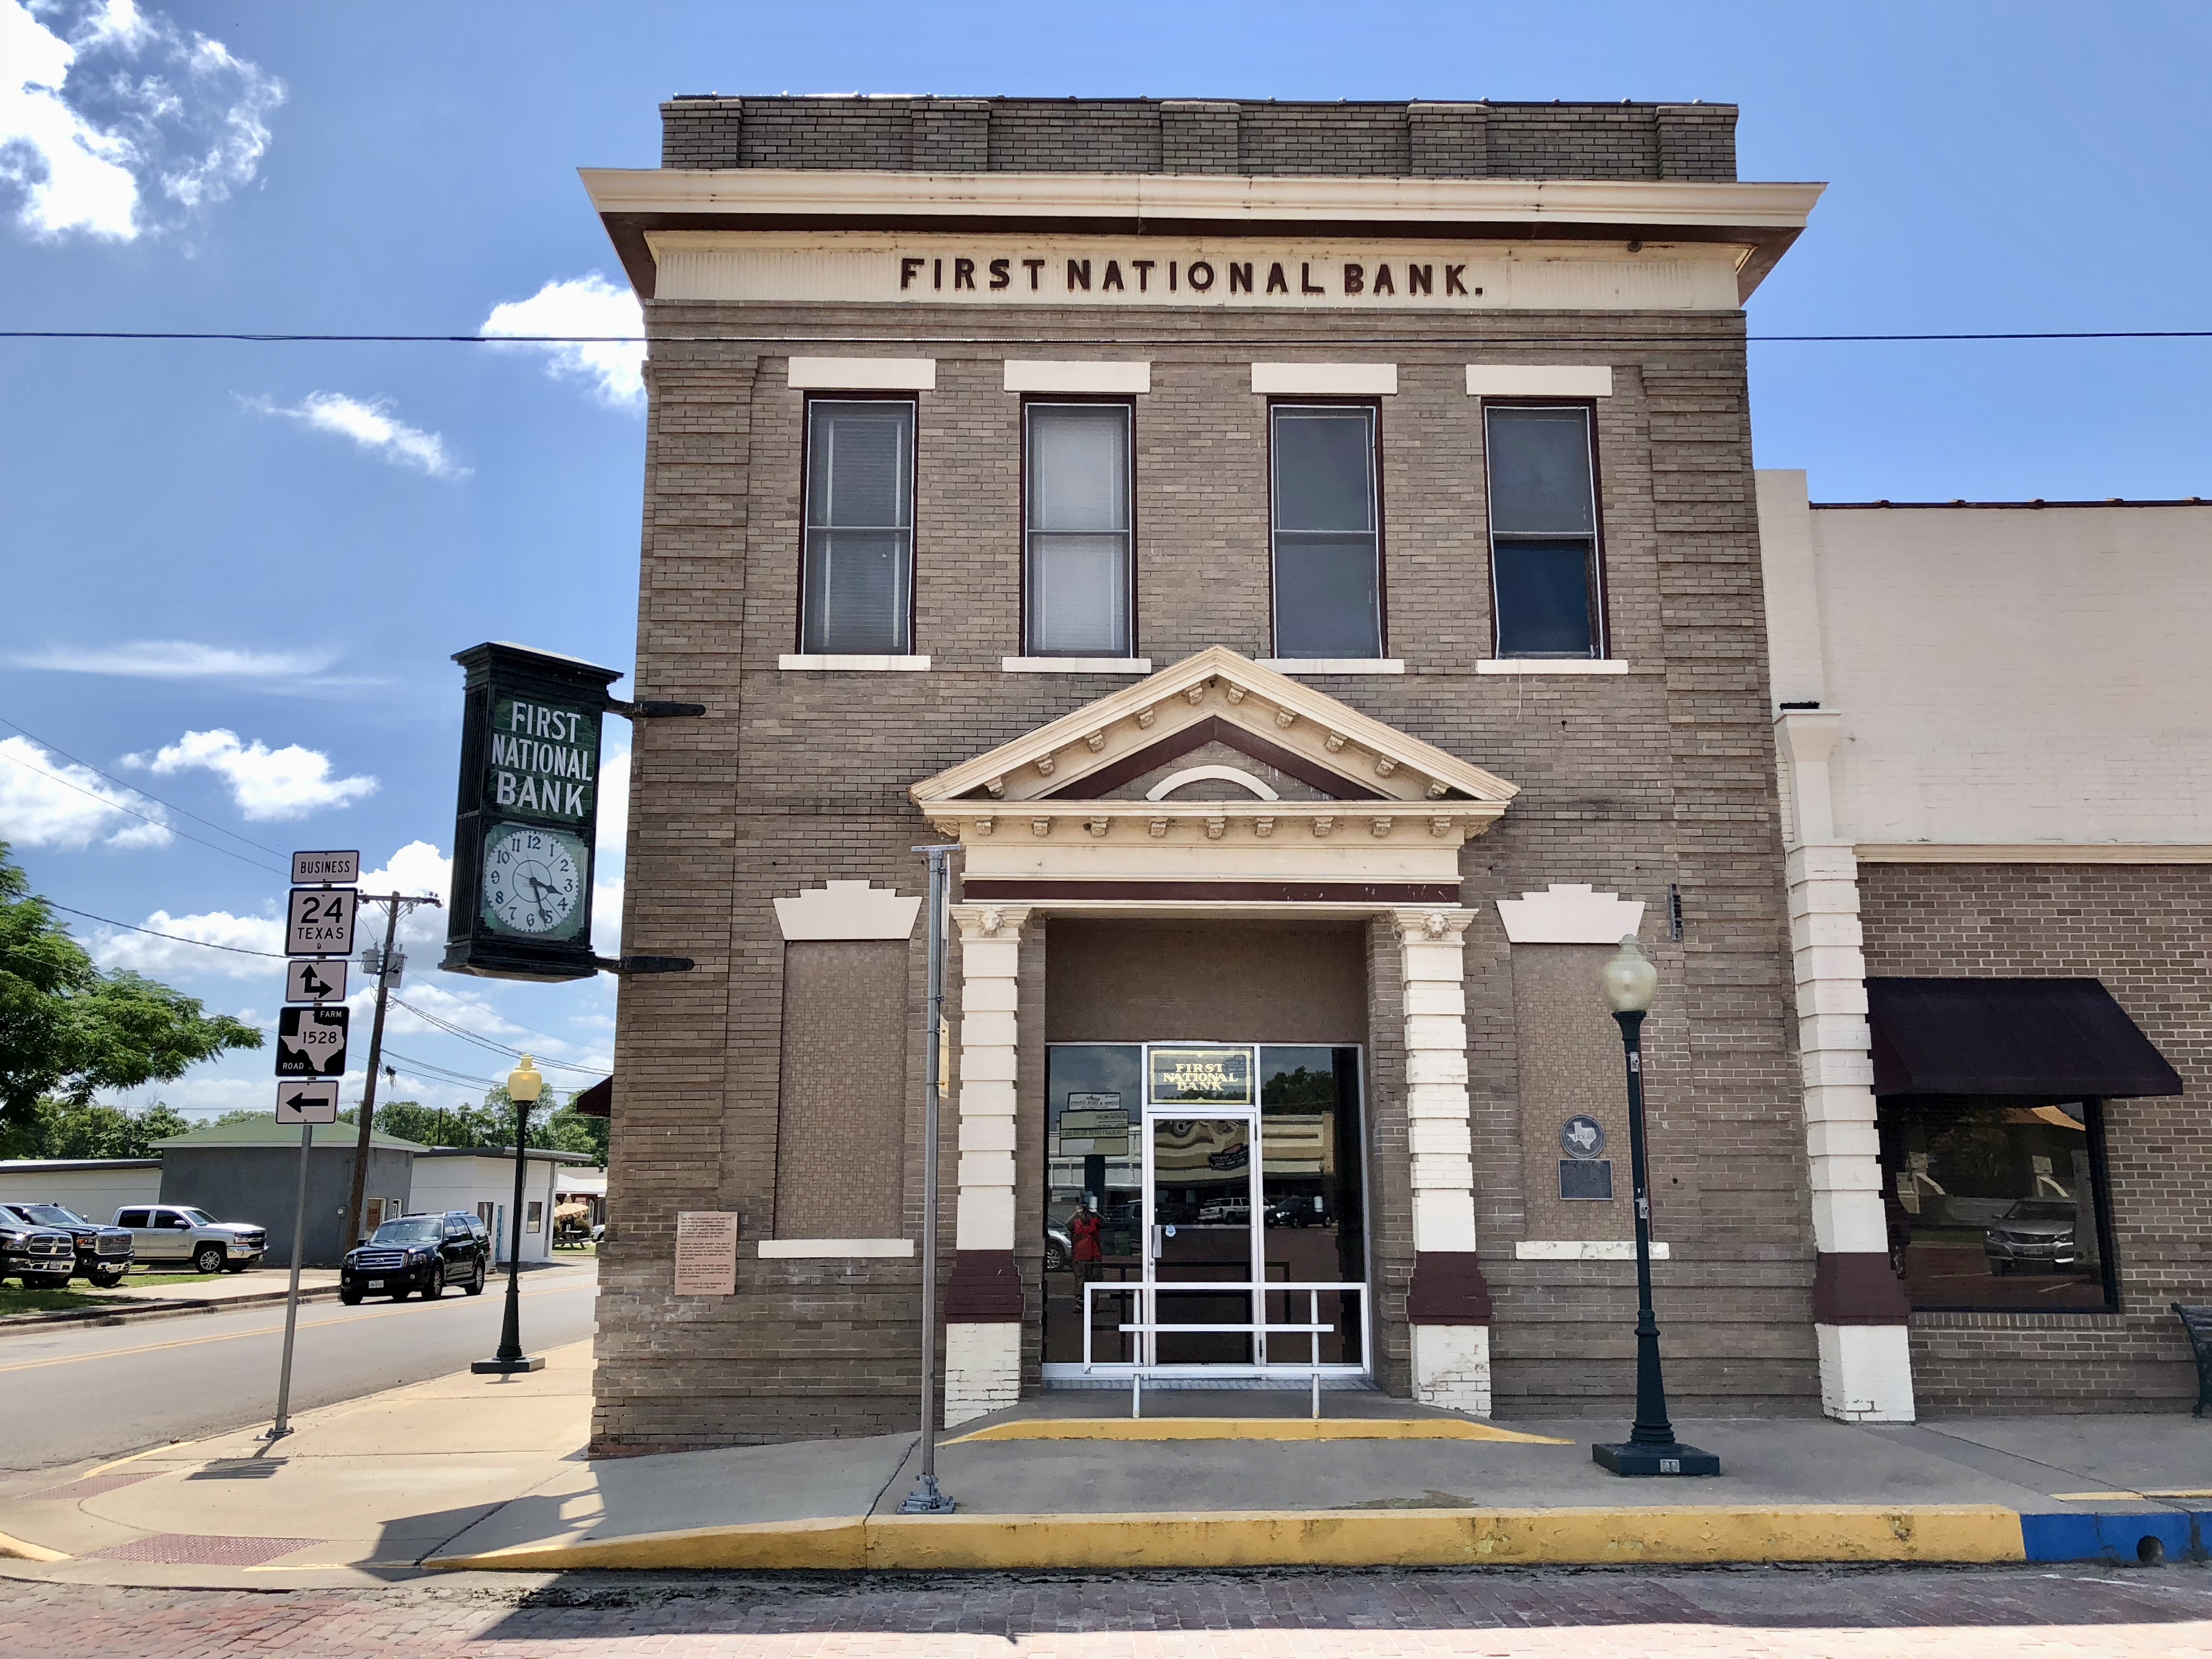 The First National Bank in Cooper.